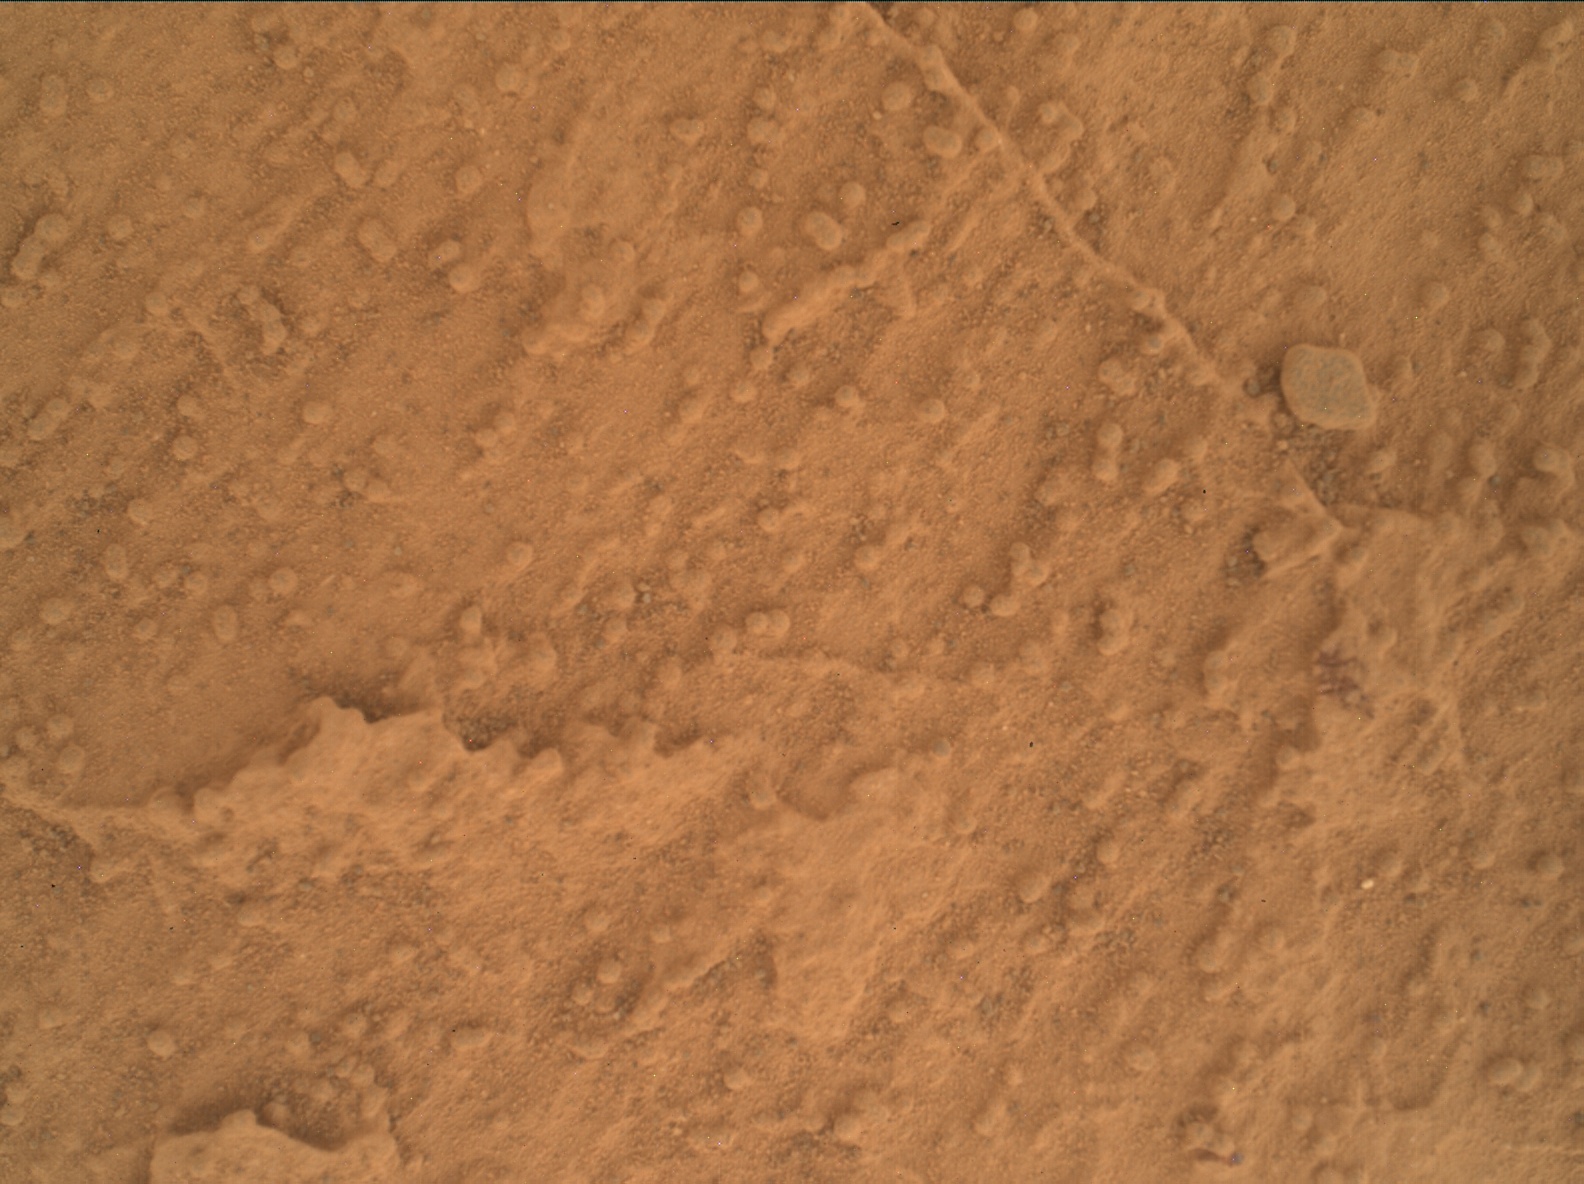 Nasa's Mars rover Curiosity acquired this image using its Mars Hand Lens Imager (MAHLI) on Sol 3456